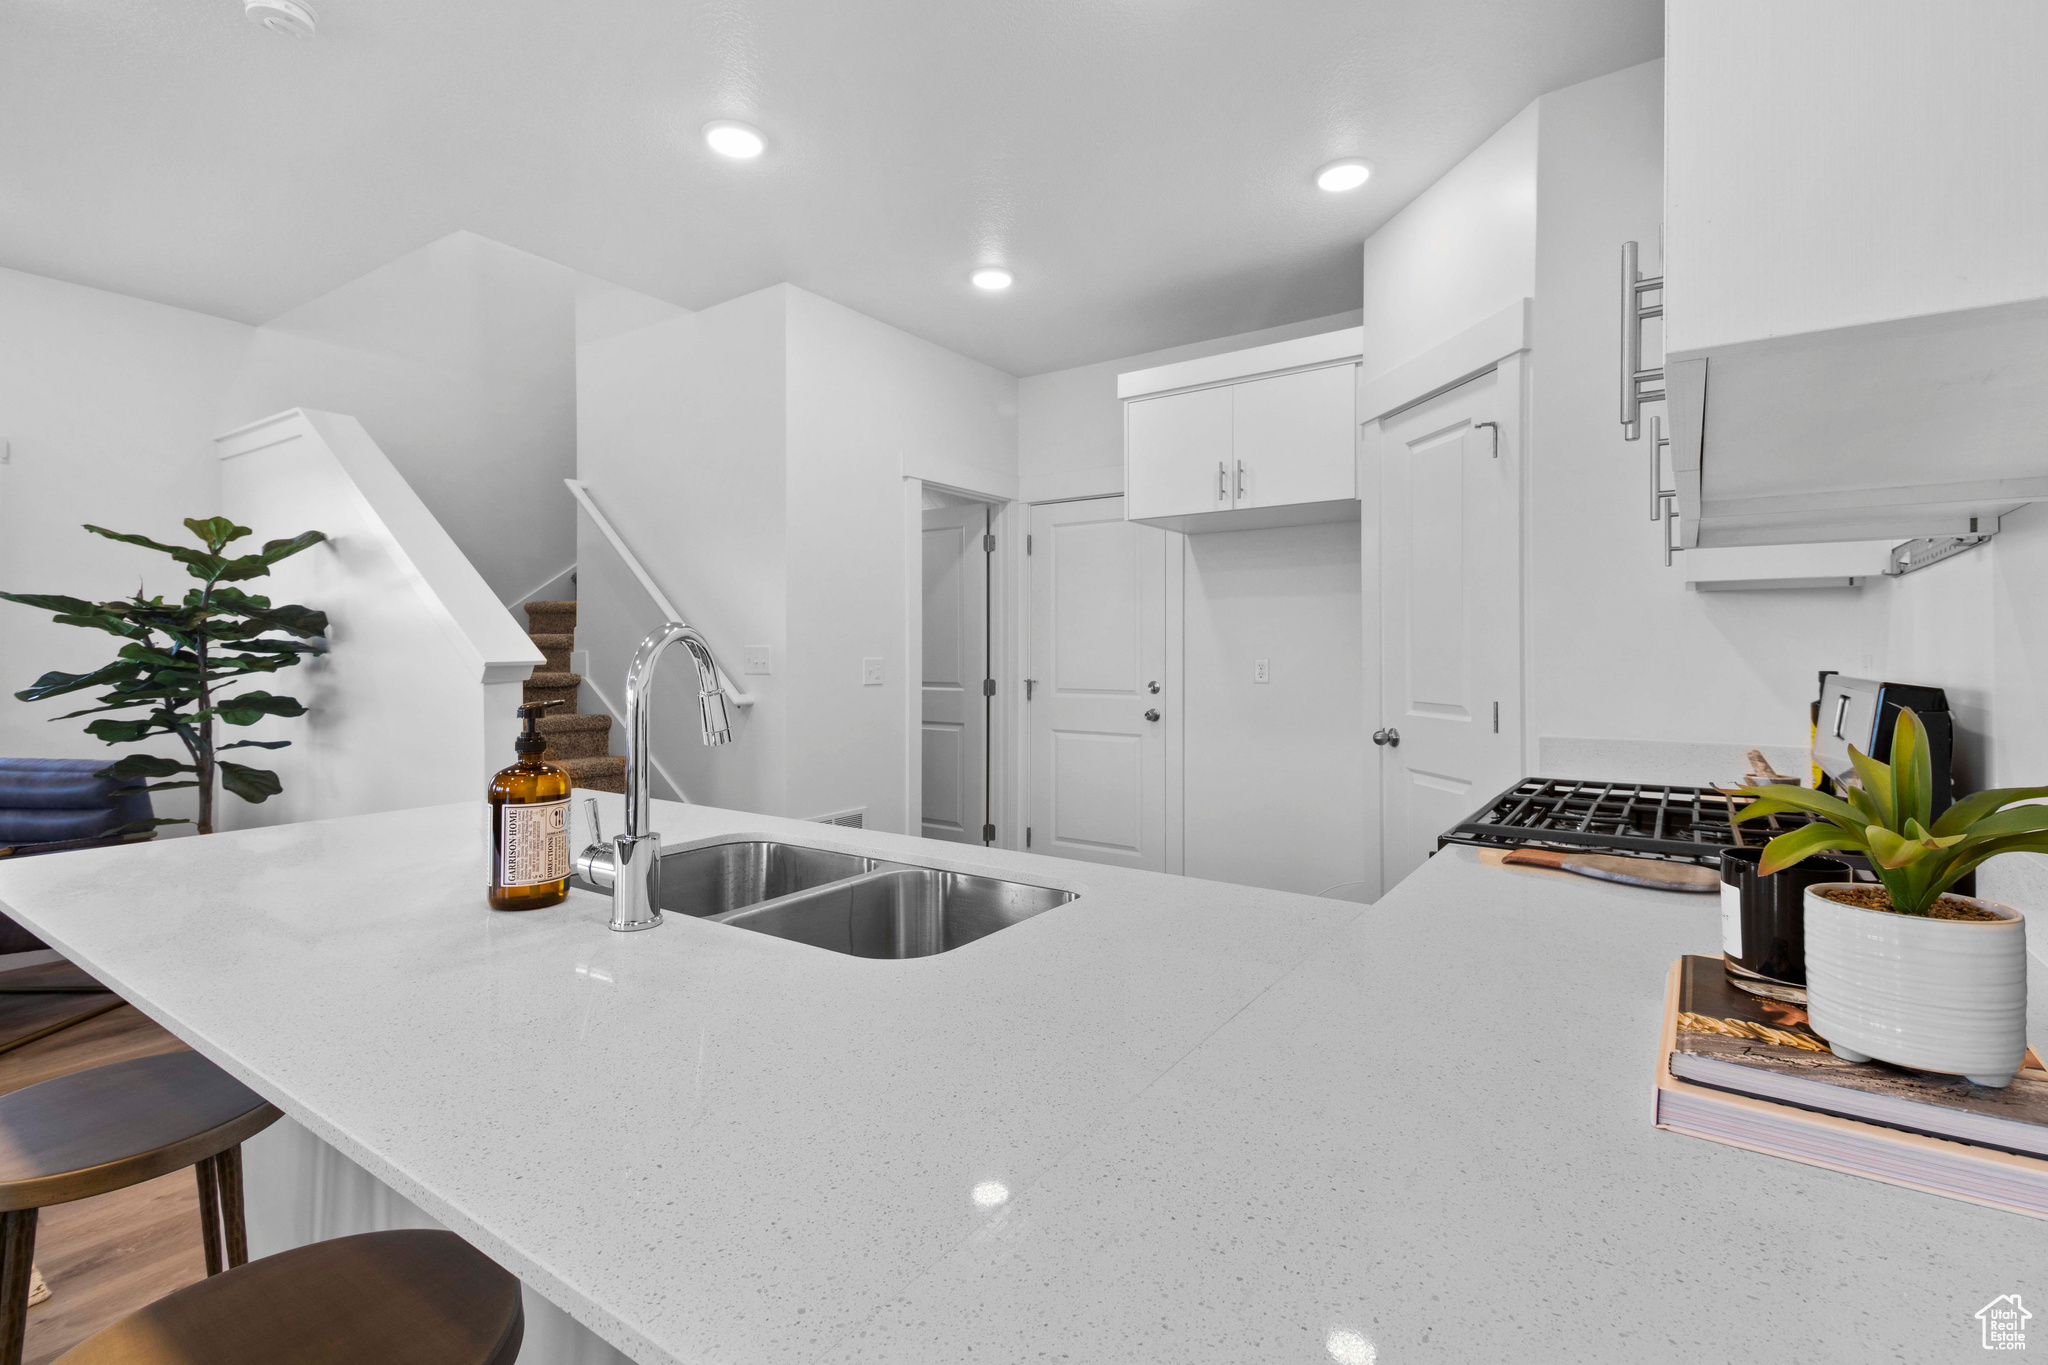 Kitchen with a breakfast bar area, sink, kitchen peninsula, light stone countertops, and white cabinets